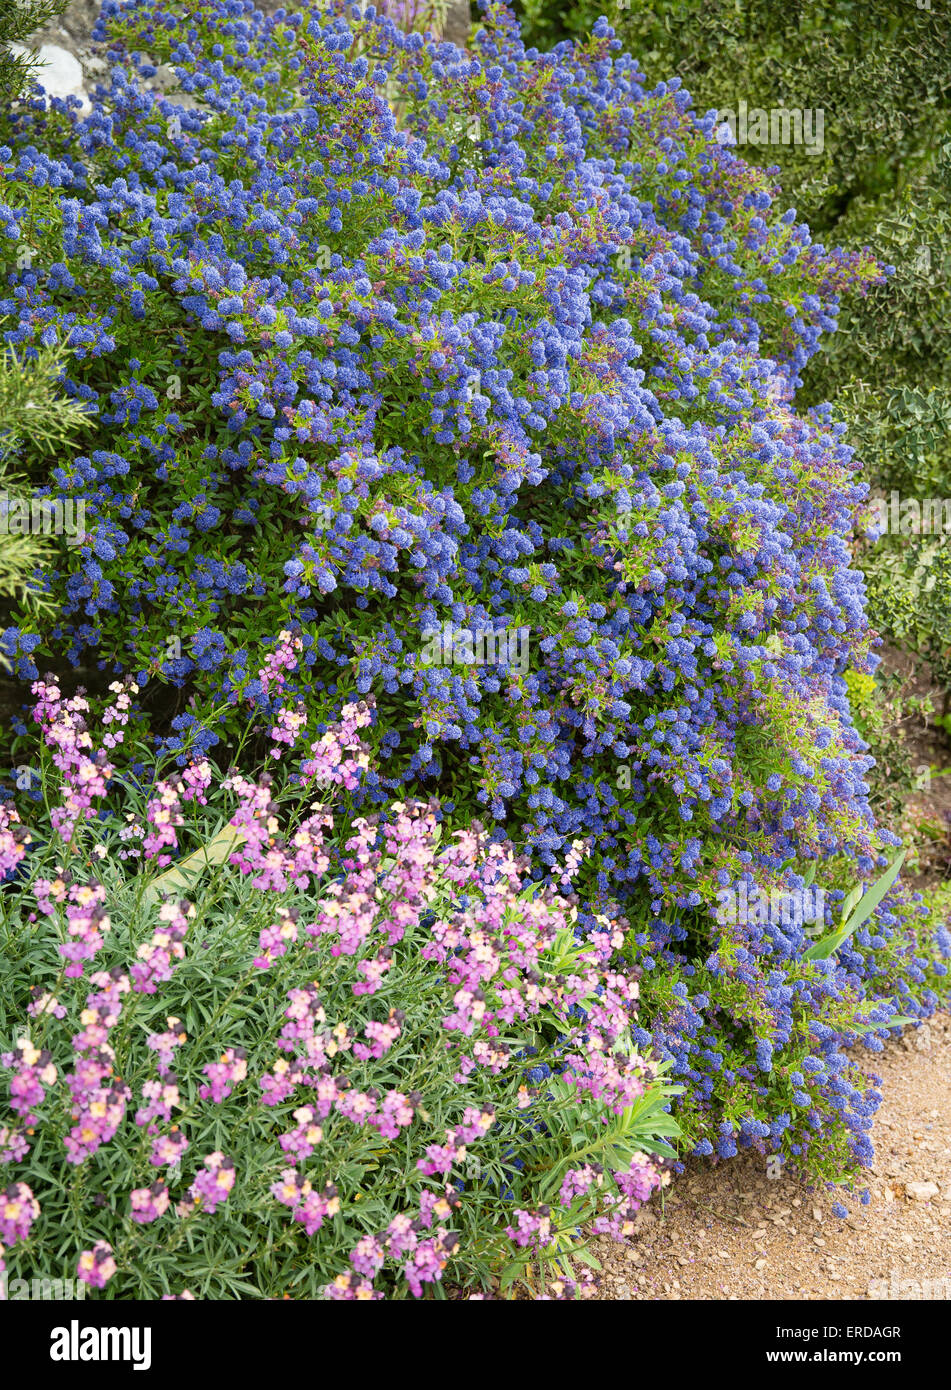 Blue Ceanothus or Californian lilac and pink Erysimum flowers in an English garden flower border Stock Photo